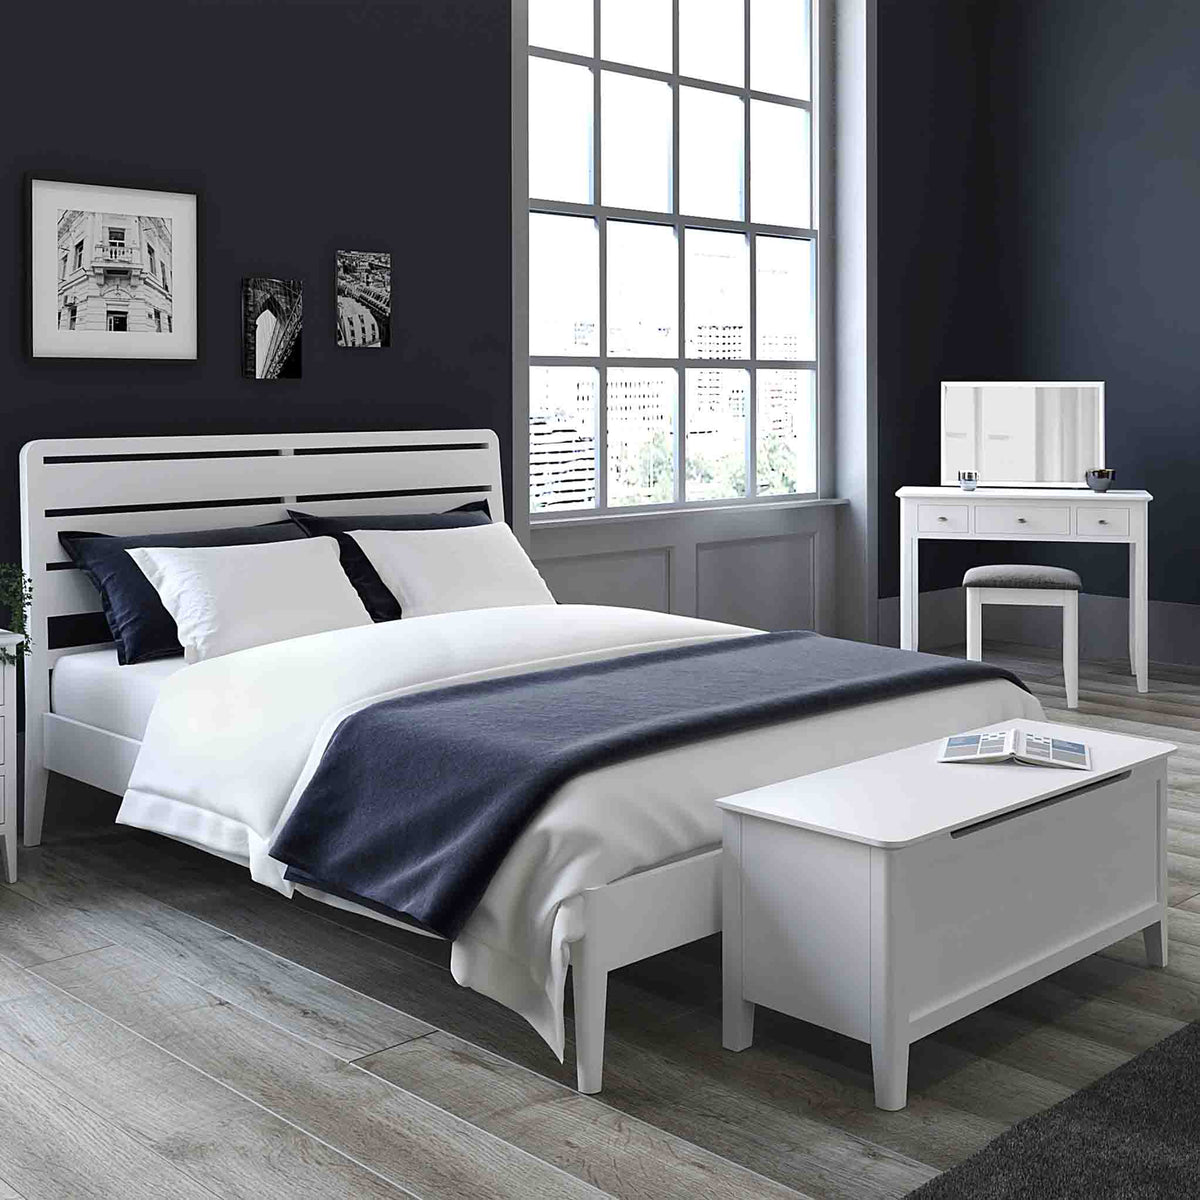 Chest White Painted Bed Frame lifestyle bedroom image